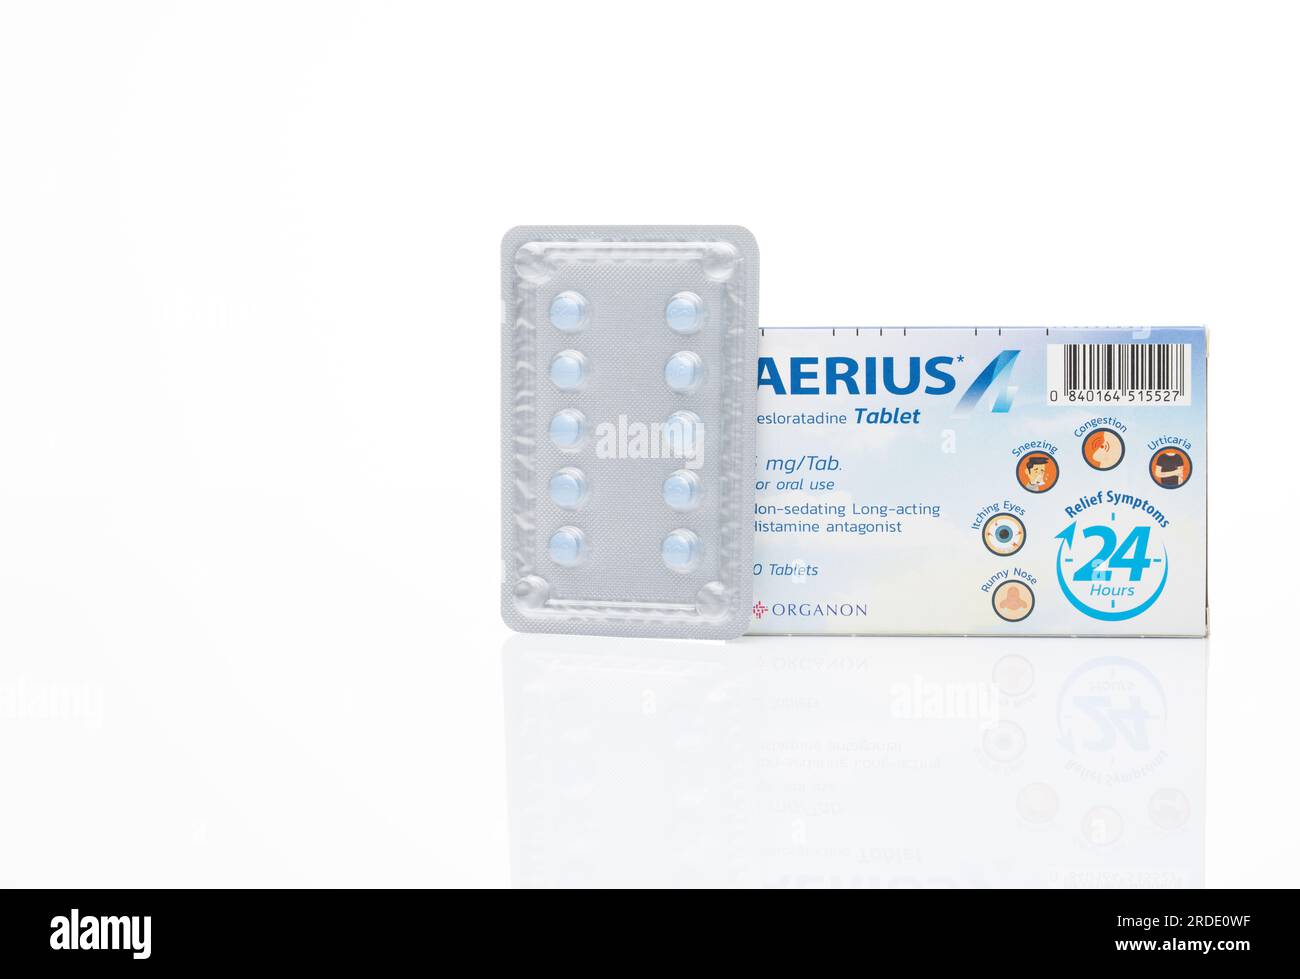 CHONBURI, THAILAND-MAY 3, 2023: Aerius with packaging on white. Desloratadine tablets pill. Product of Organon. Antihistamine medicine for relieve Stock Photo